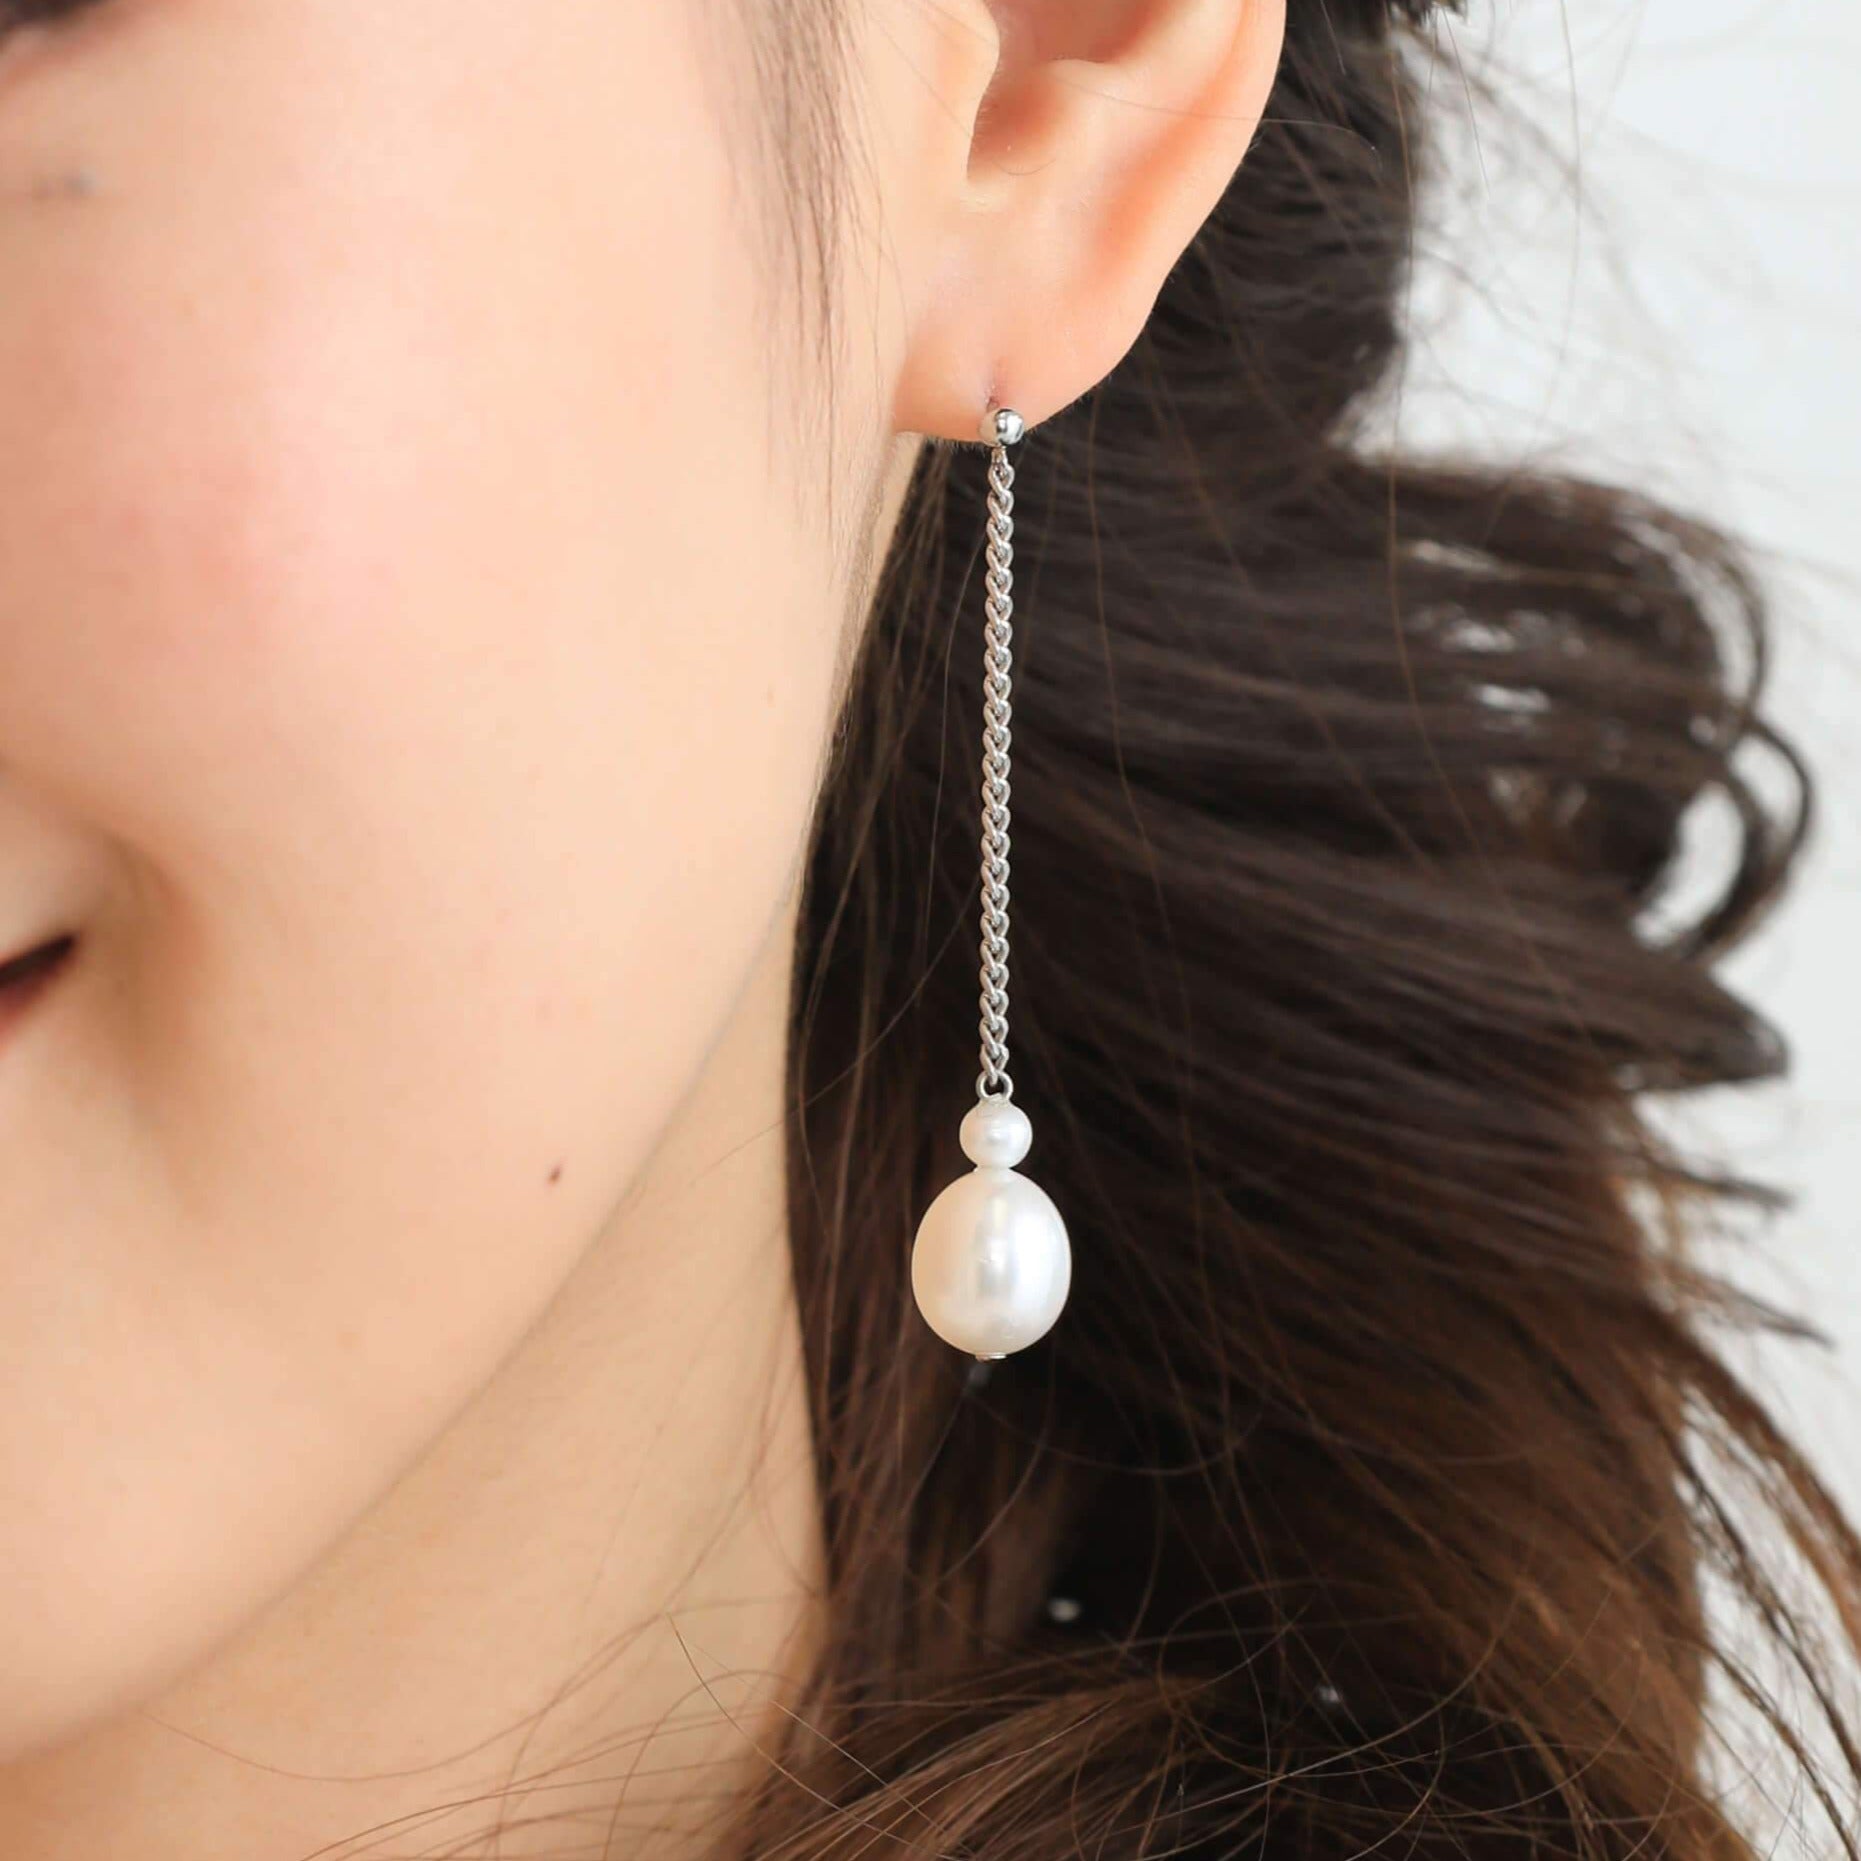 White Gold Chain with Oval and Round White Pearl Earring Close up